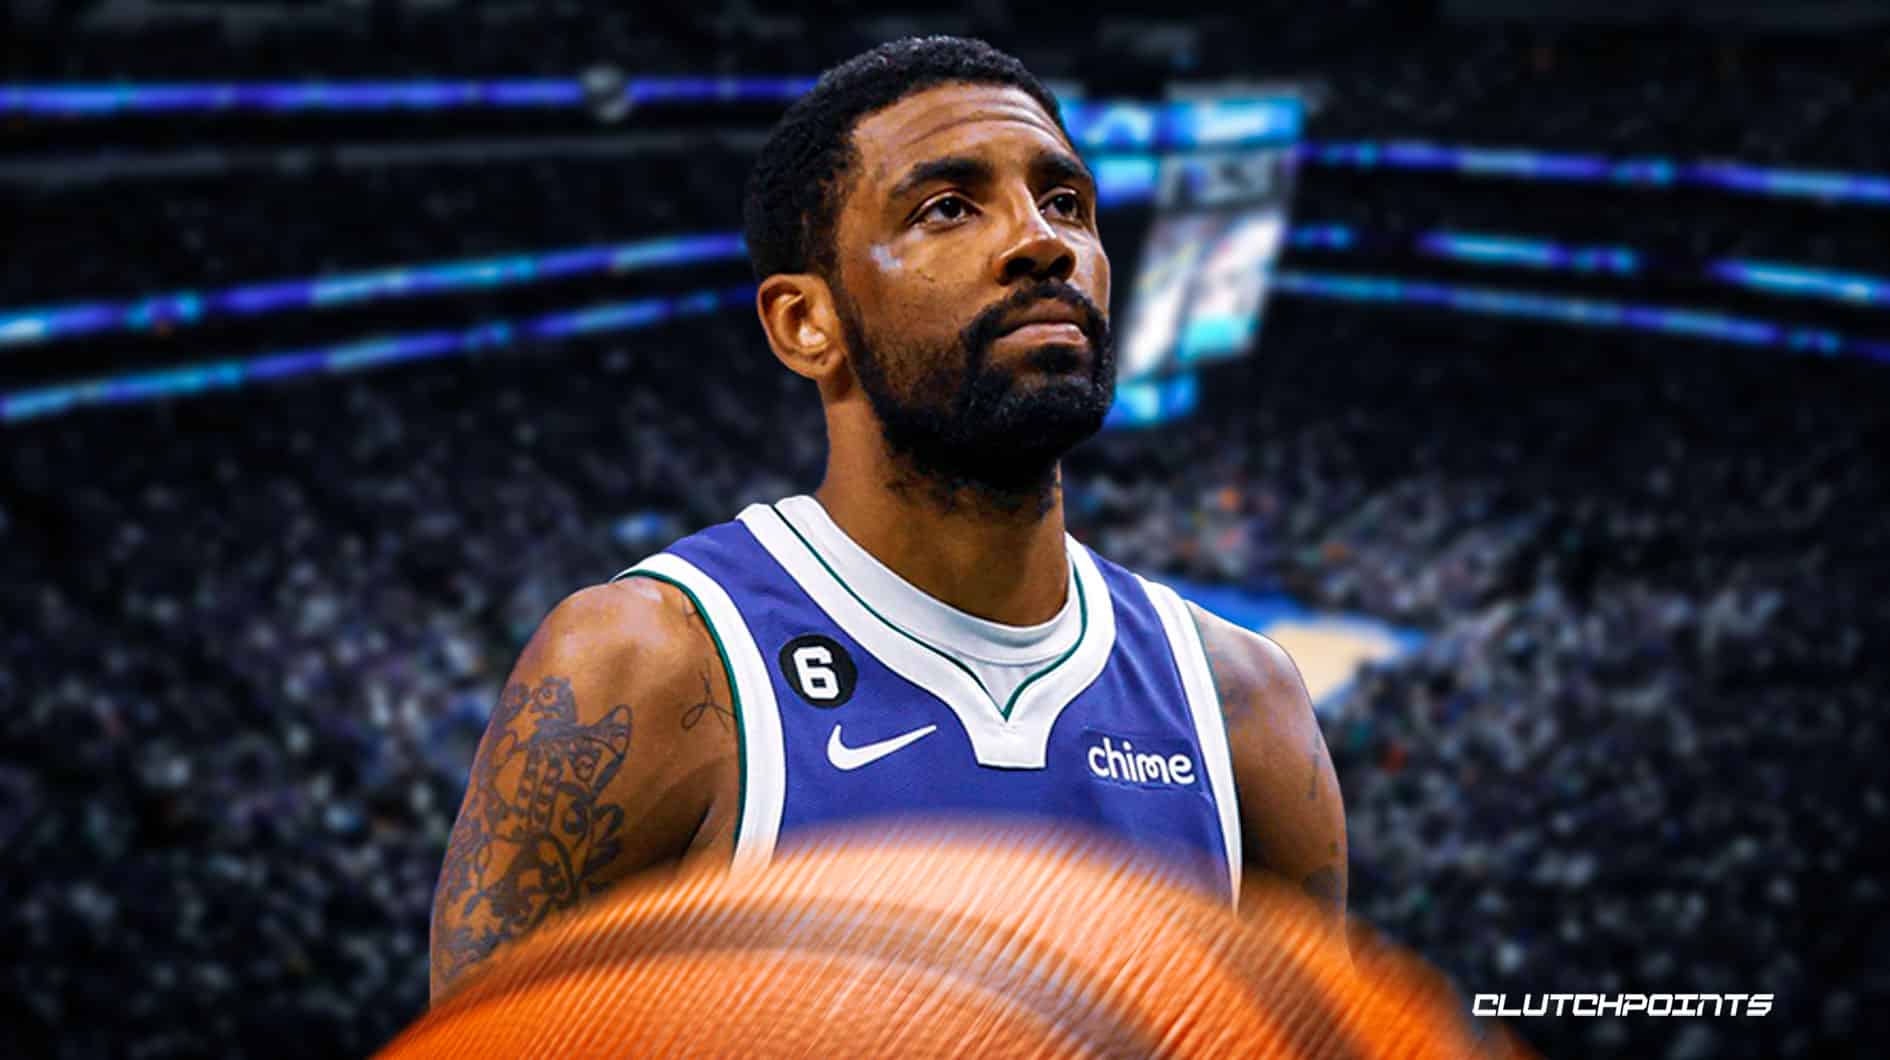 Kyrie Irving to change jersey number if he re-signs with Mavericks